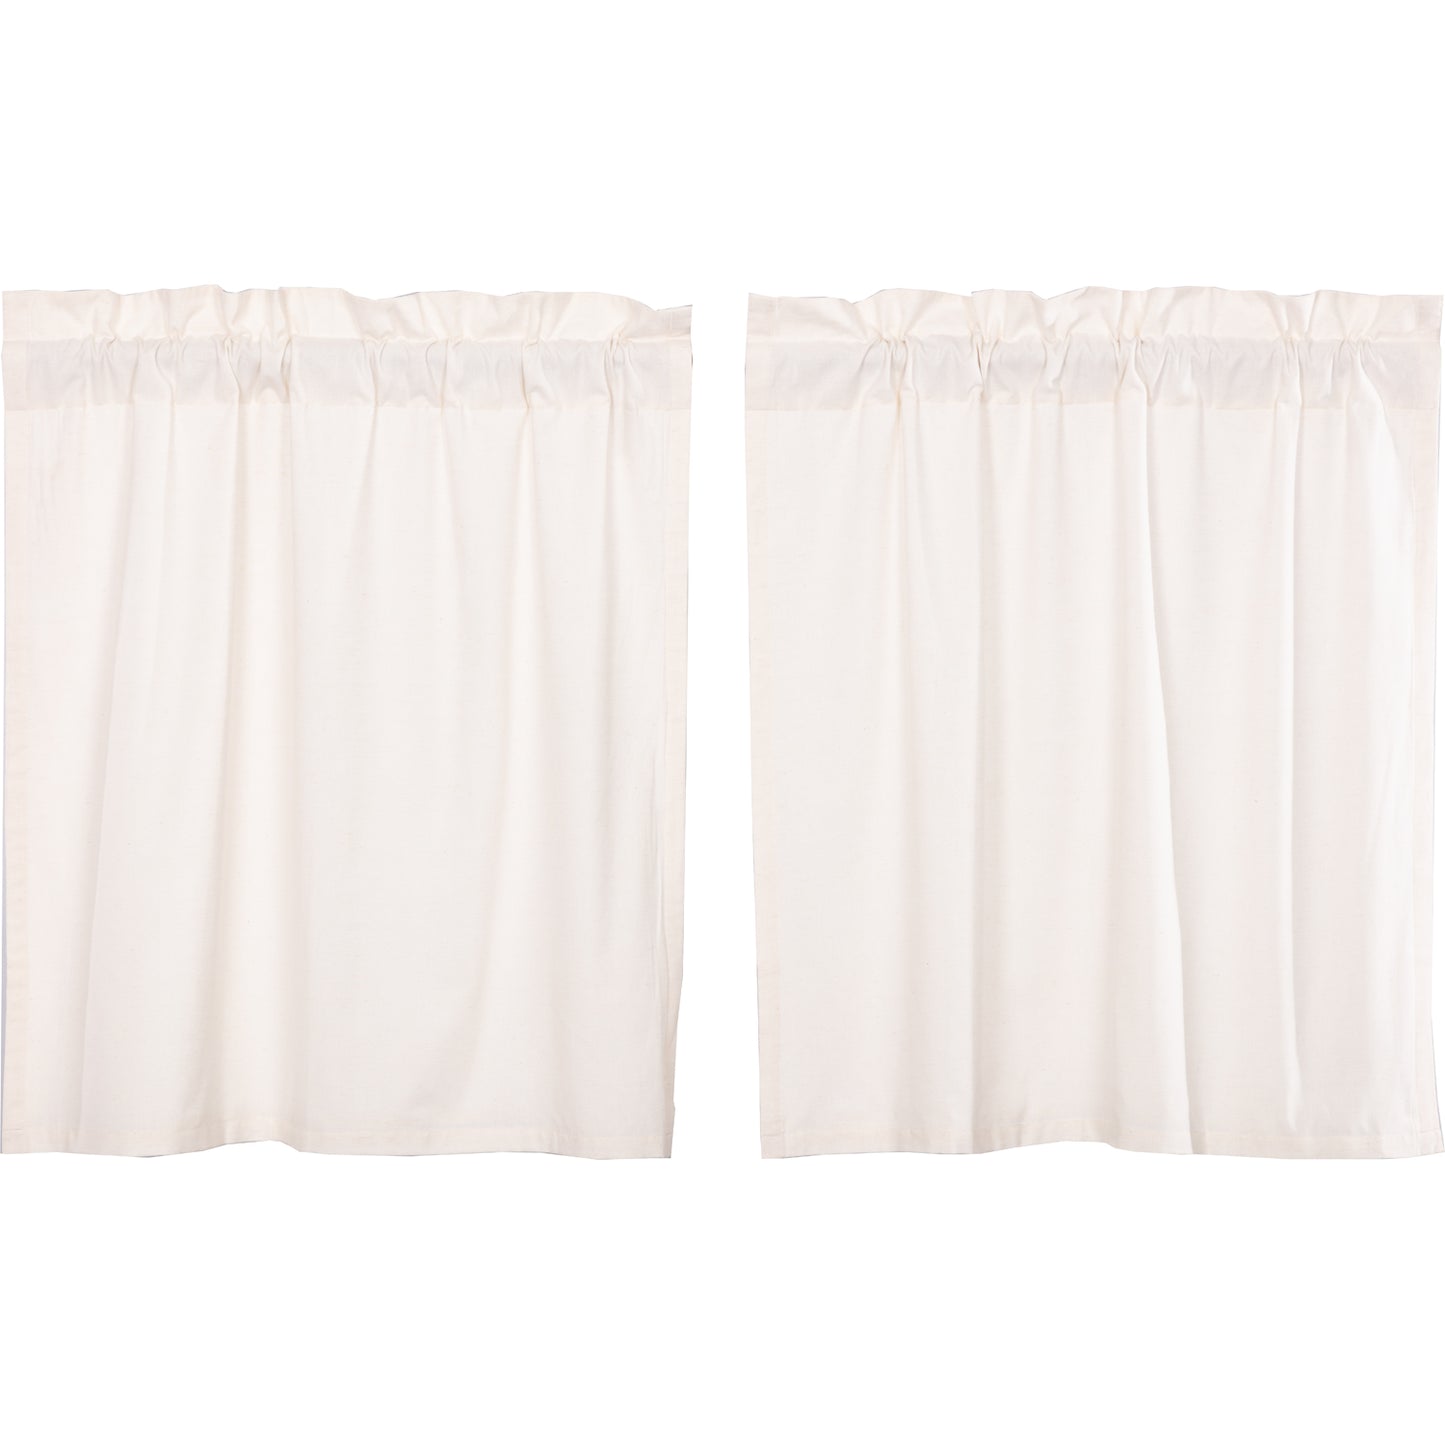 52209-Simple-Life-Flax-Antique-White-Tier-Set-of-2-L36xW36-image-6